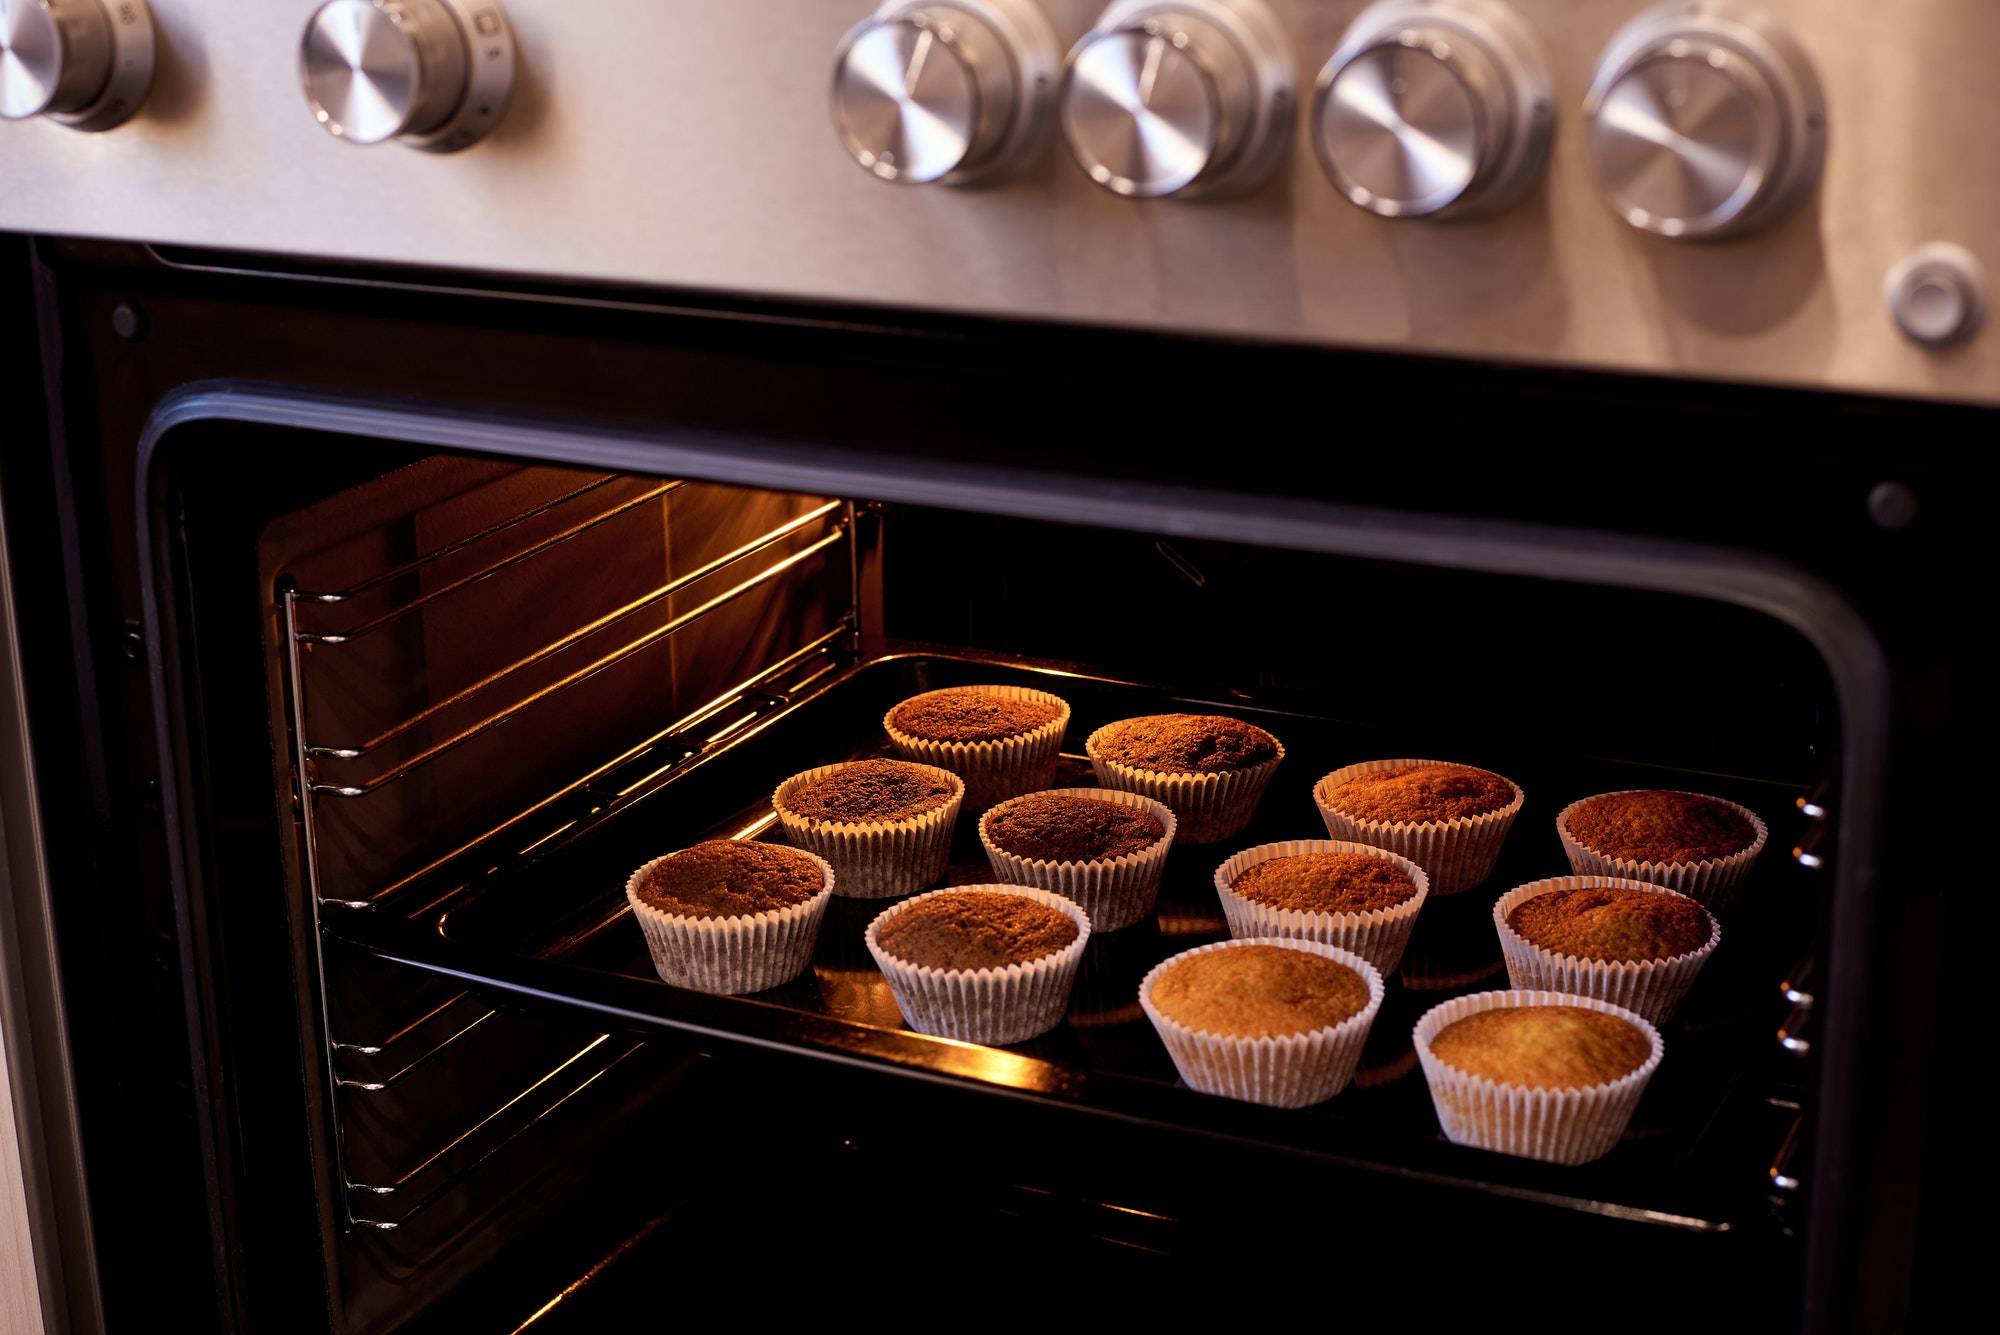 Oven baked cupcakes